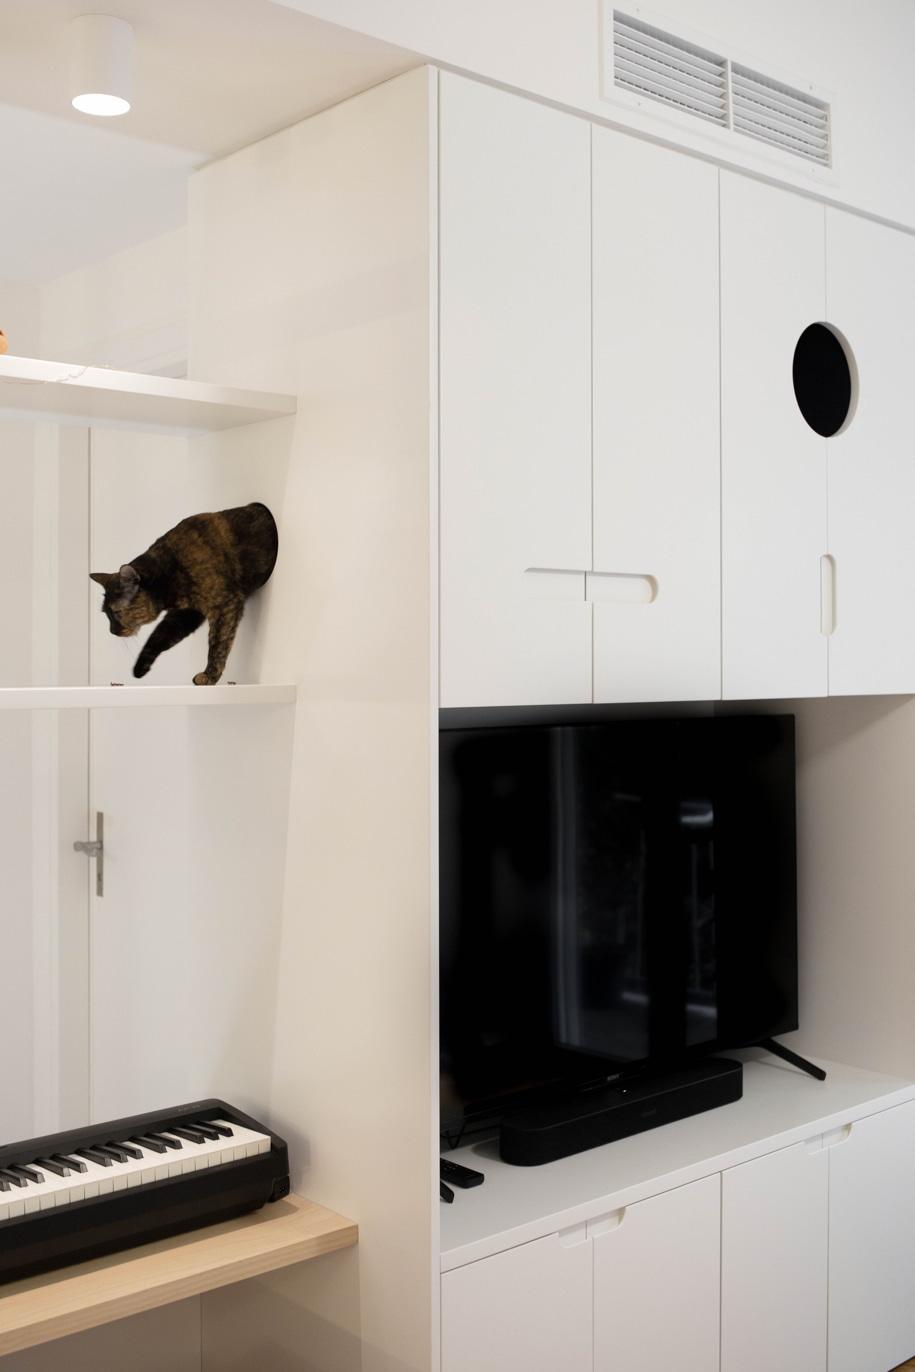 Archisearch MJA or A flat for three humans and a cat | Apartment renovation by Threshold architecture studio